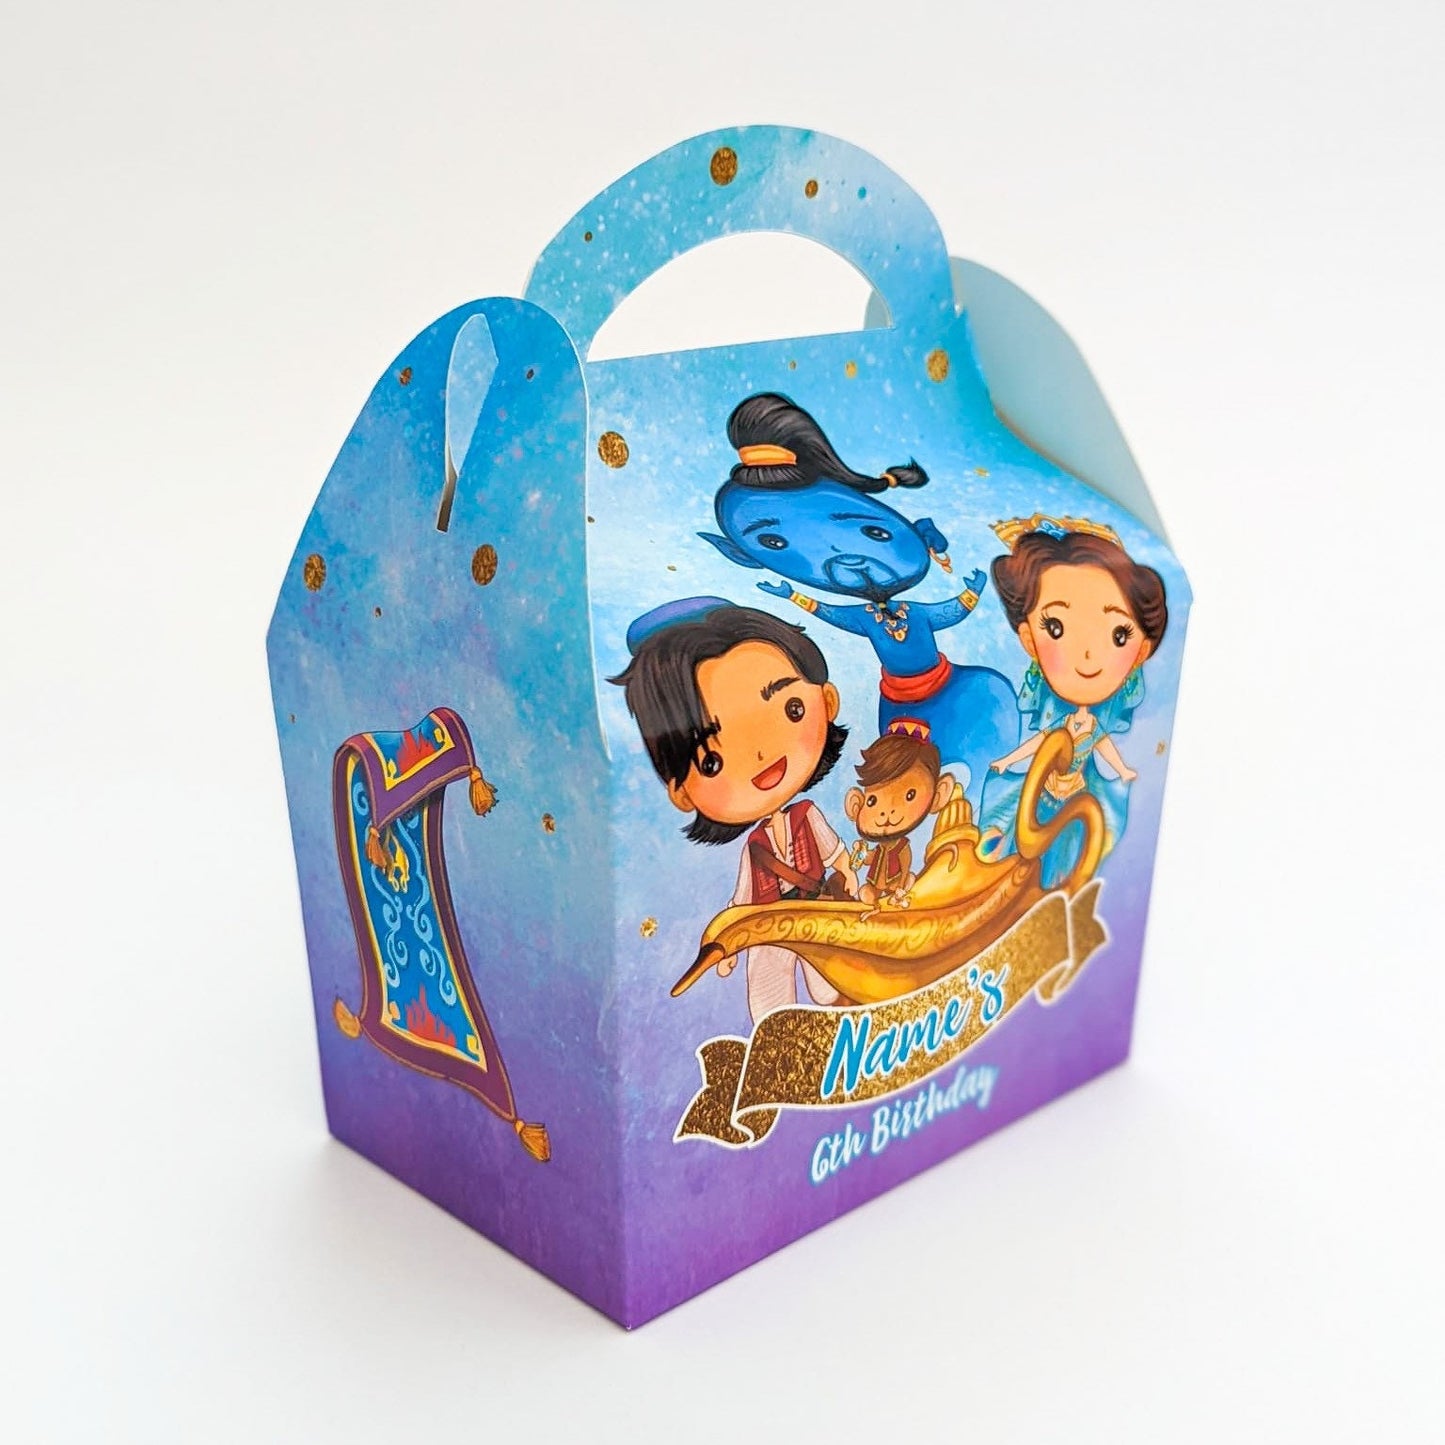 Aladdin Inspired Watercolour Personalised Children’s Party Treat Box